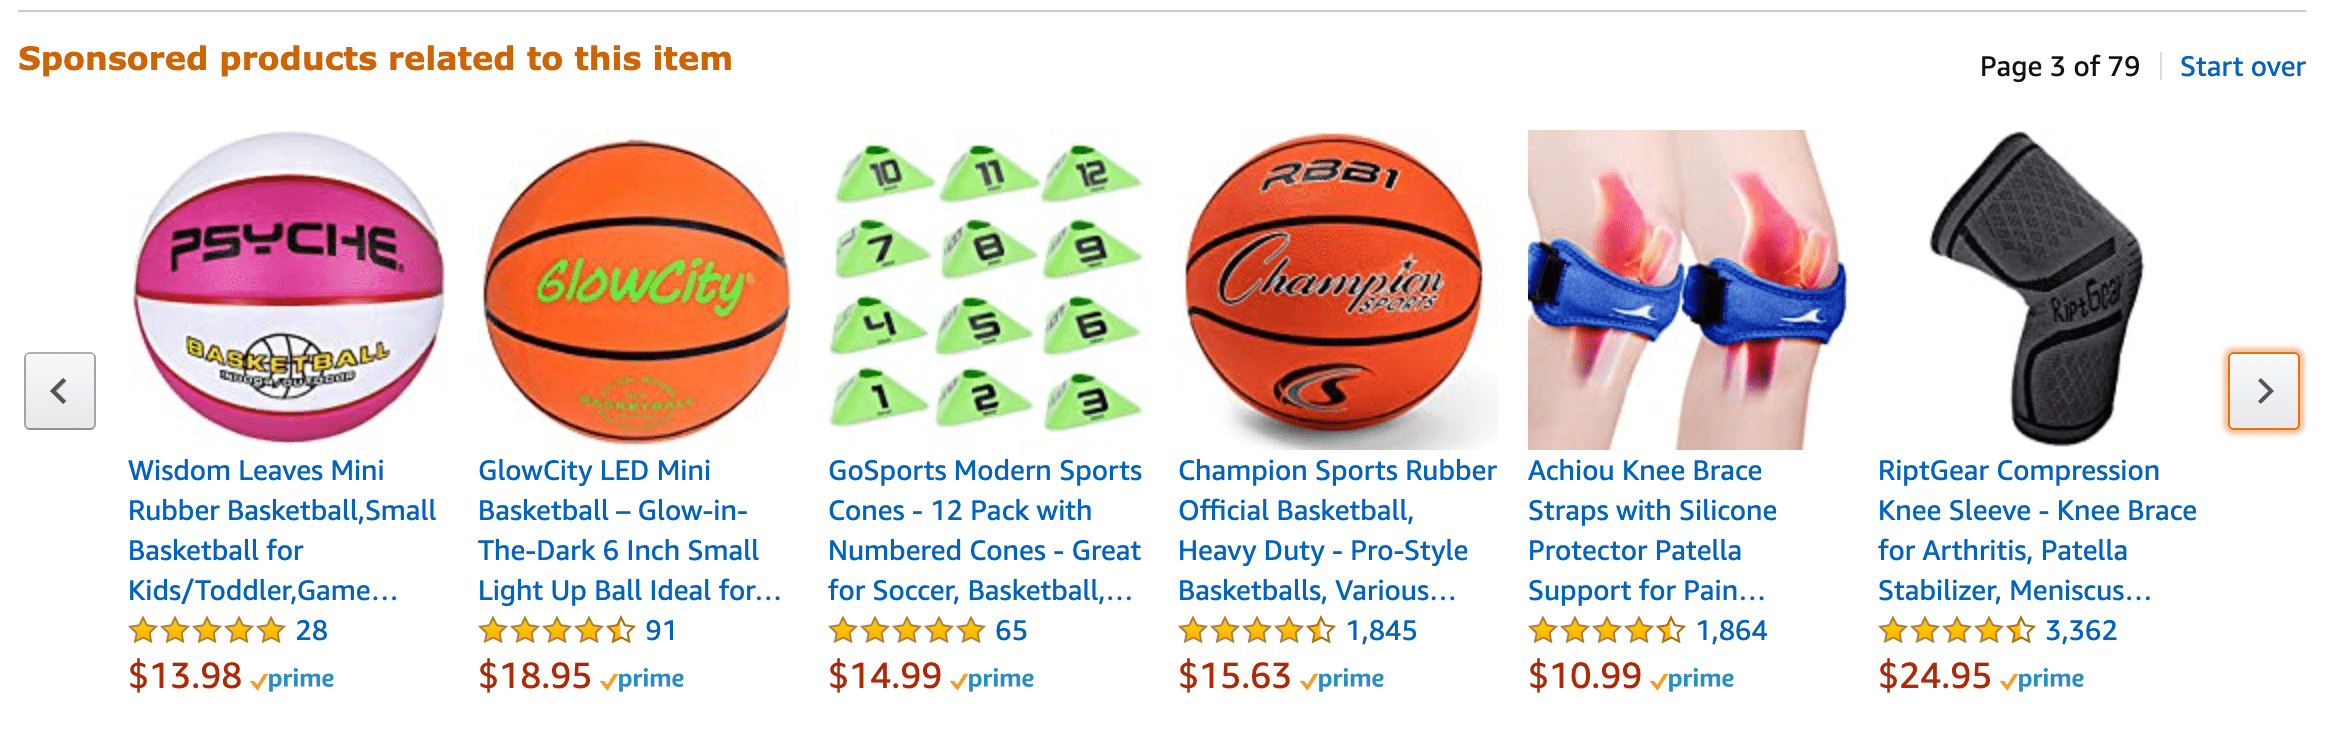 sponsored products related to basketball on amazon